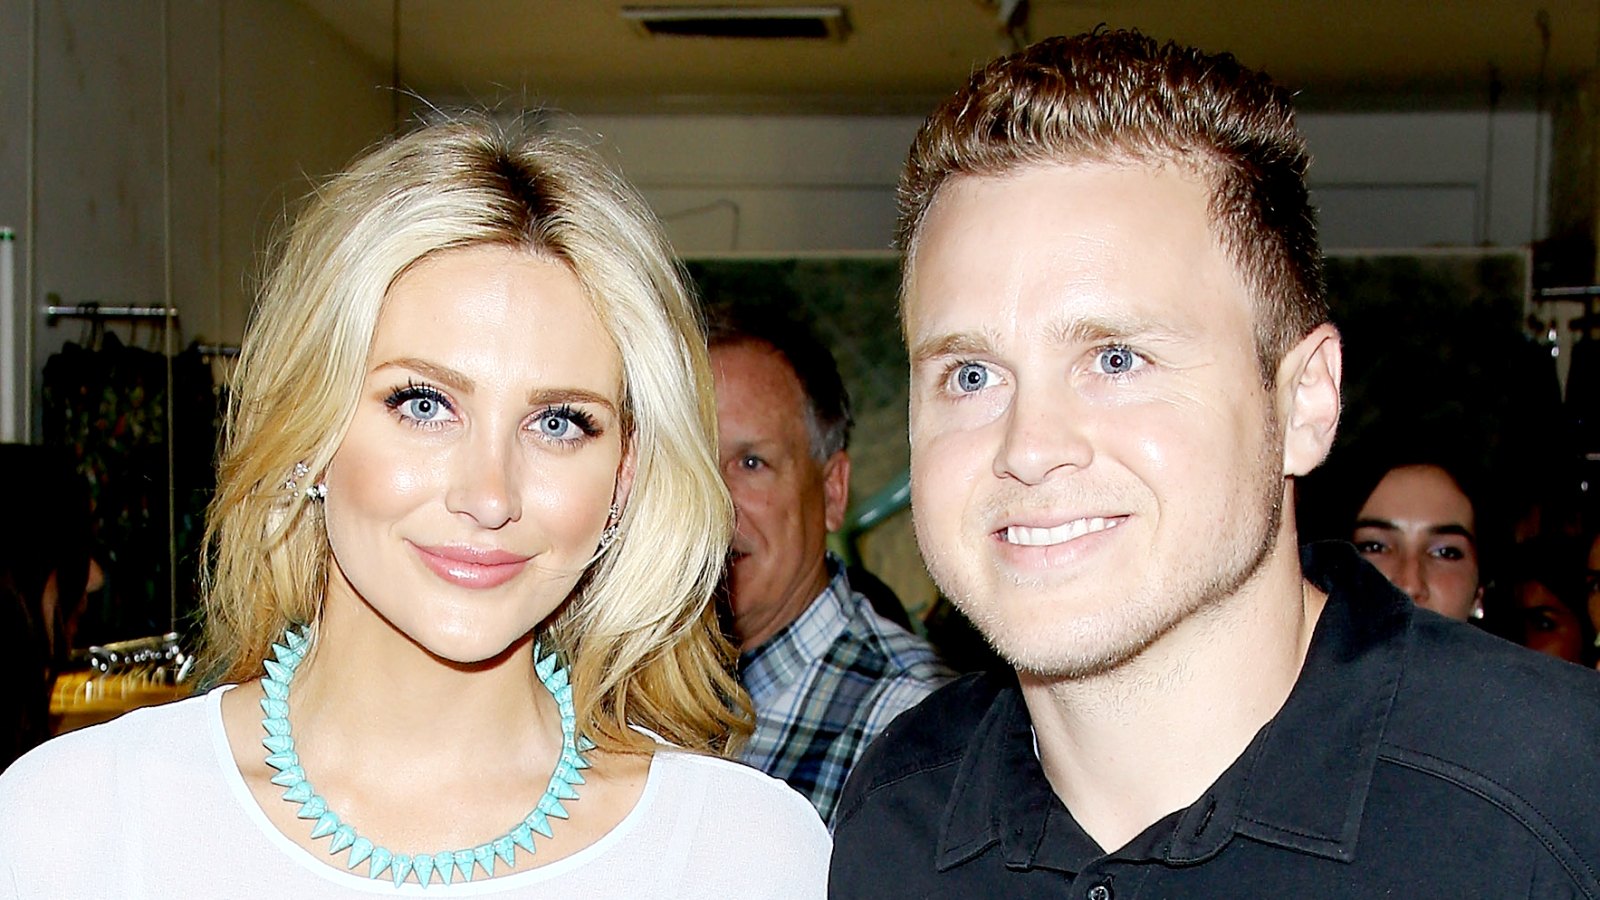 Stephanie Pratt and Spencer Pratt attend the US launch of MeMe London held at DiLascia in Los Angeles on July 28, 2015.